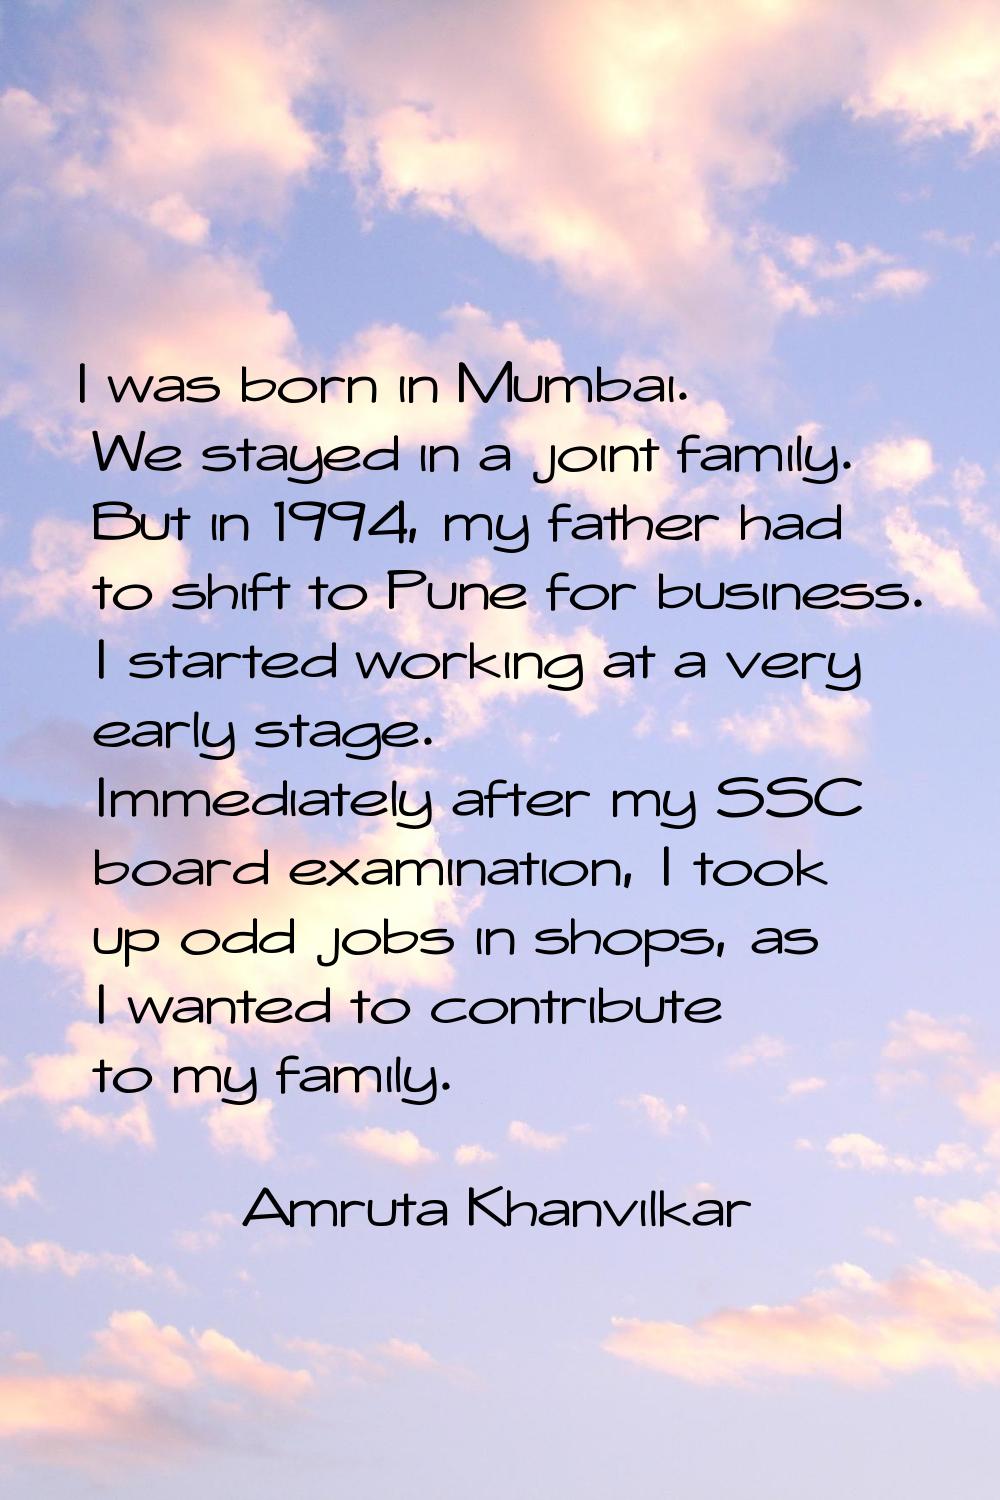 I was born in Mumbai. We stayed in a joint family. But in 1994, my father had to shift to Pune for 